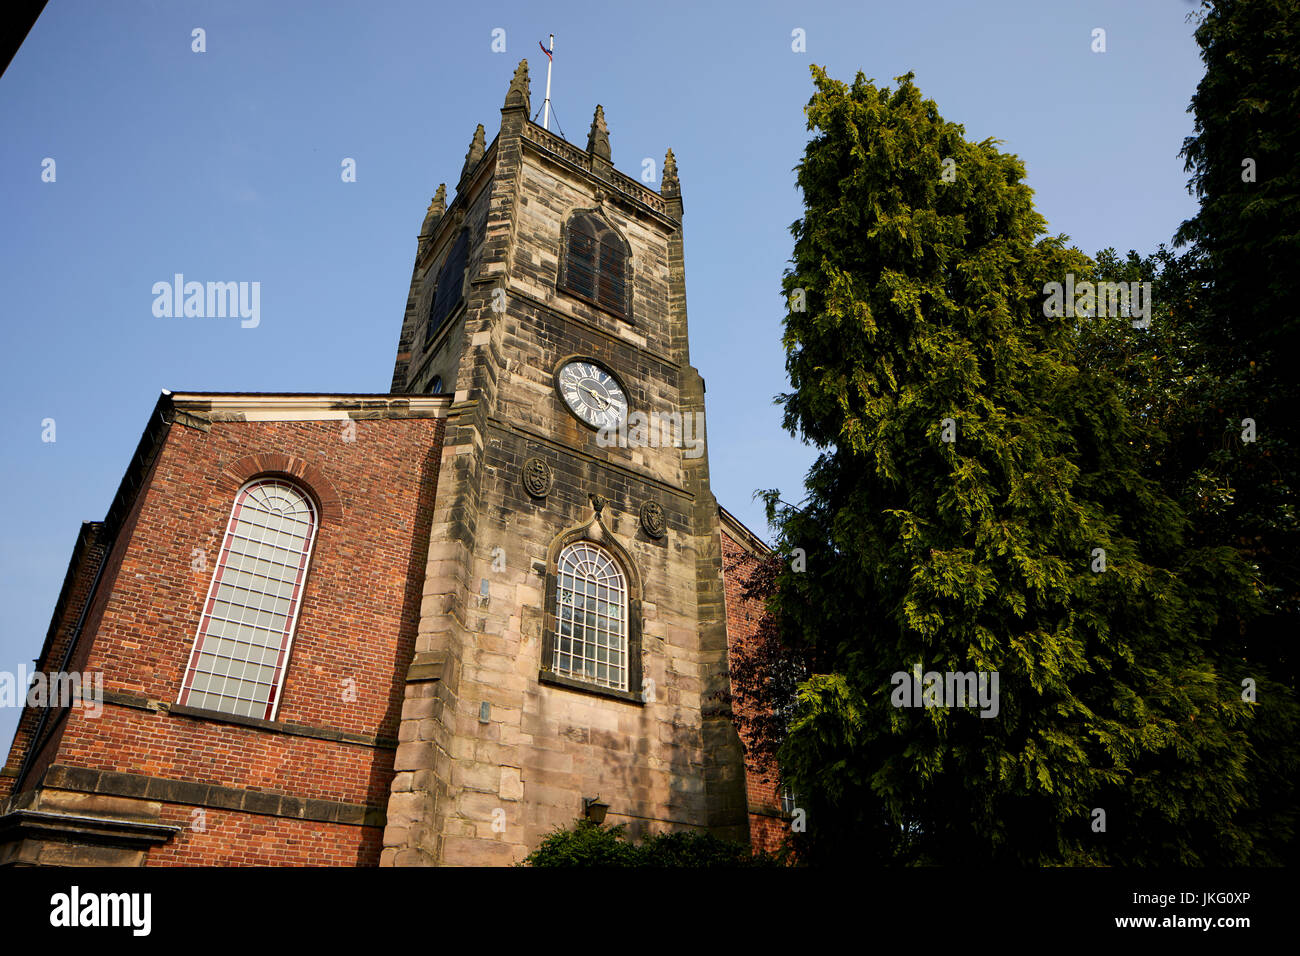 Red brick with stone dressing neoclassical St Peter's Church grade I listed in Congleton Town Centre, Cheshire East, England. Stock Photo